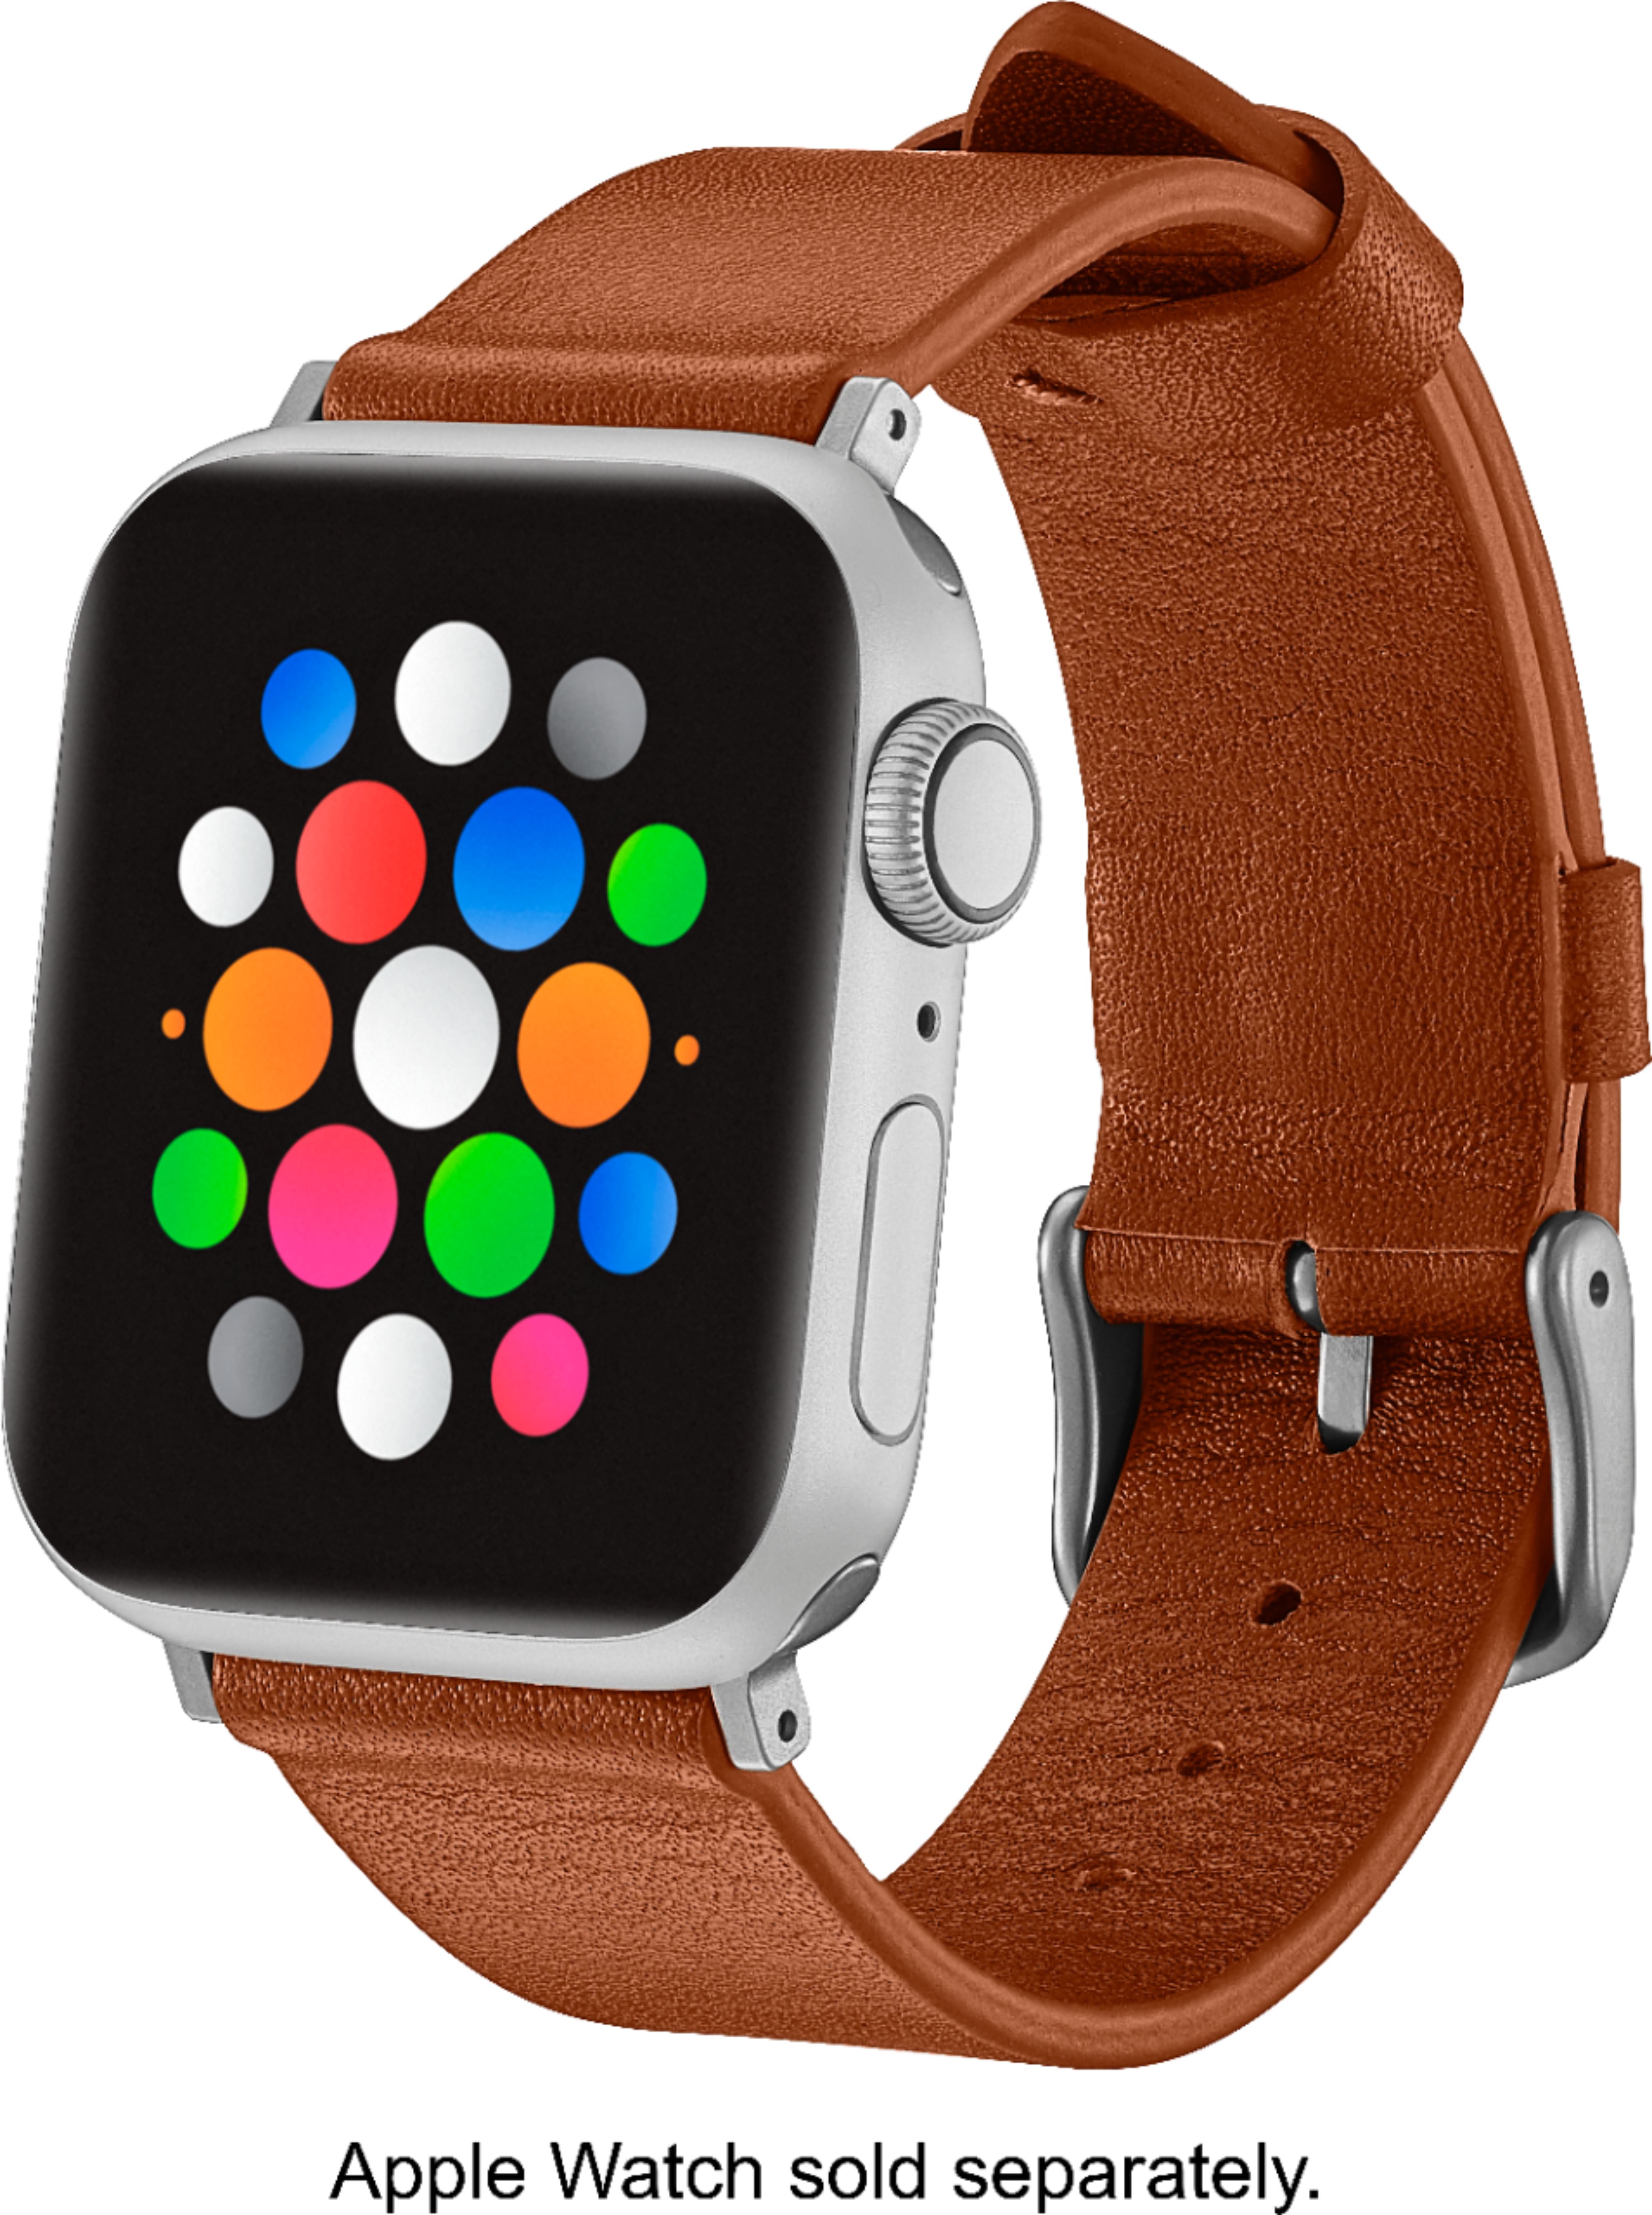 Best Buy: Platinum™ Horween Leather Band for Apple Watch 38mm